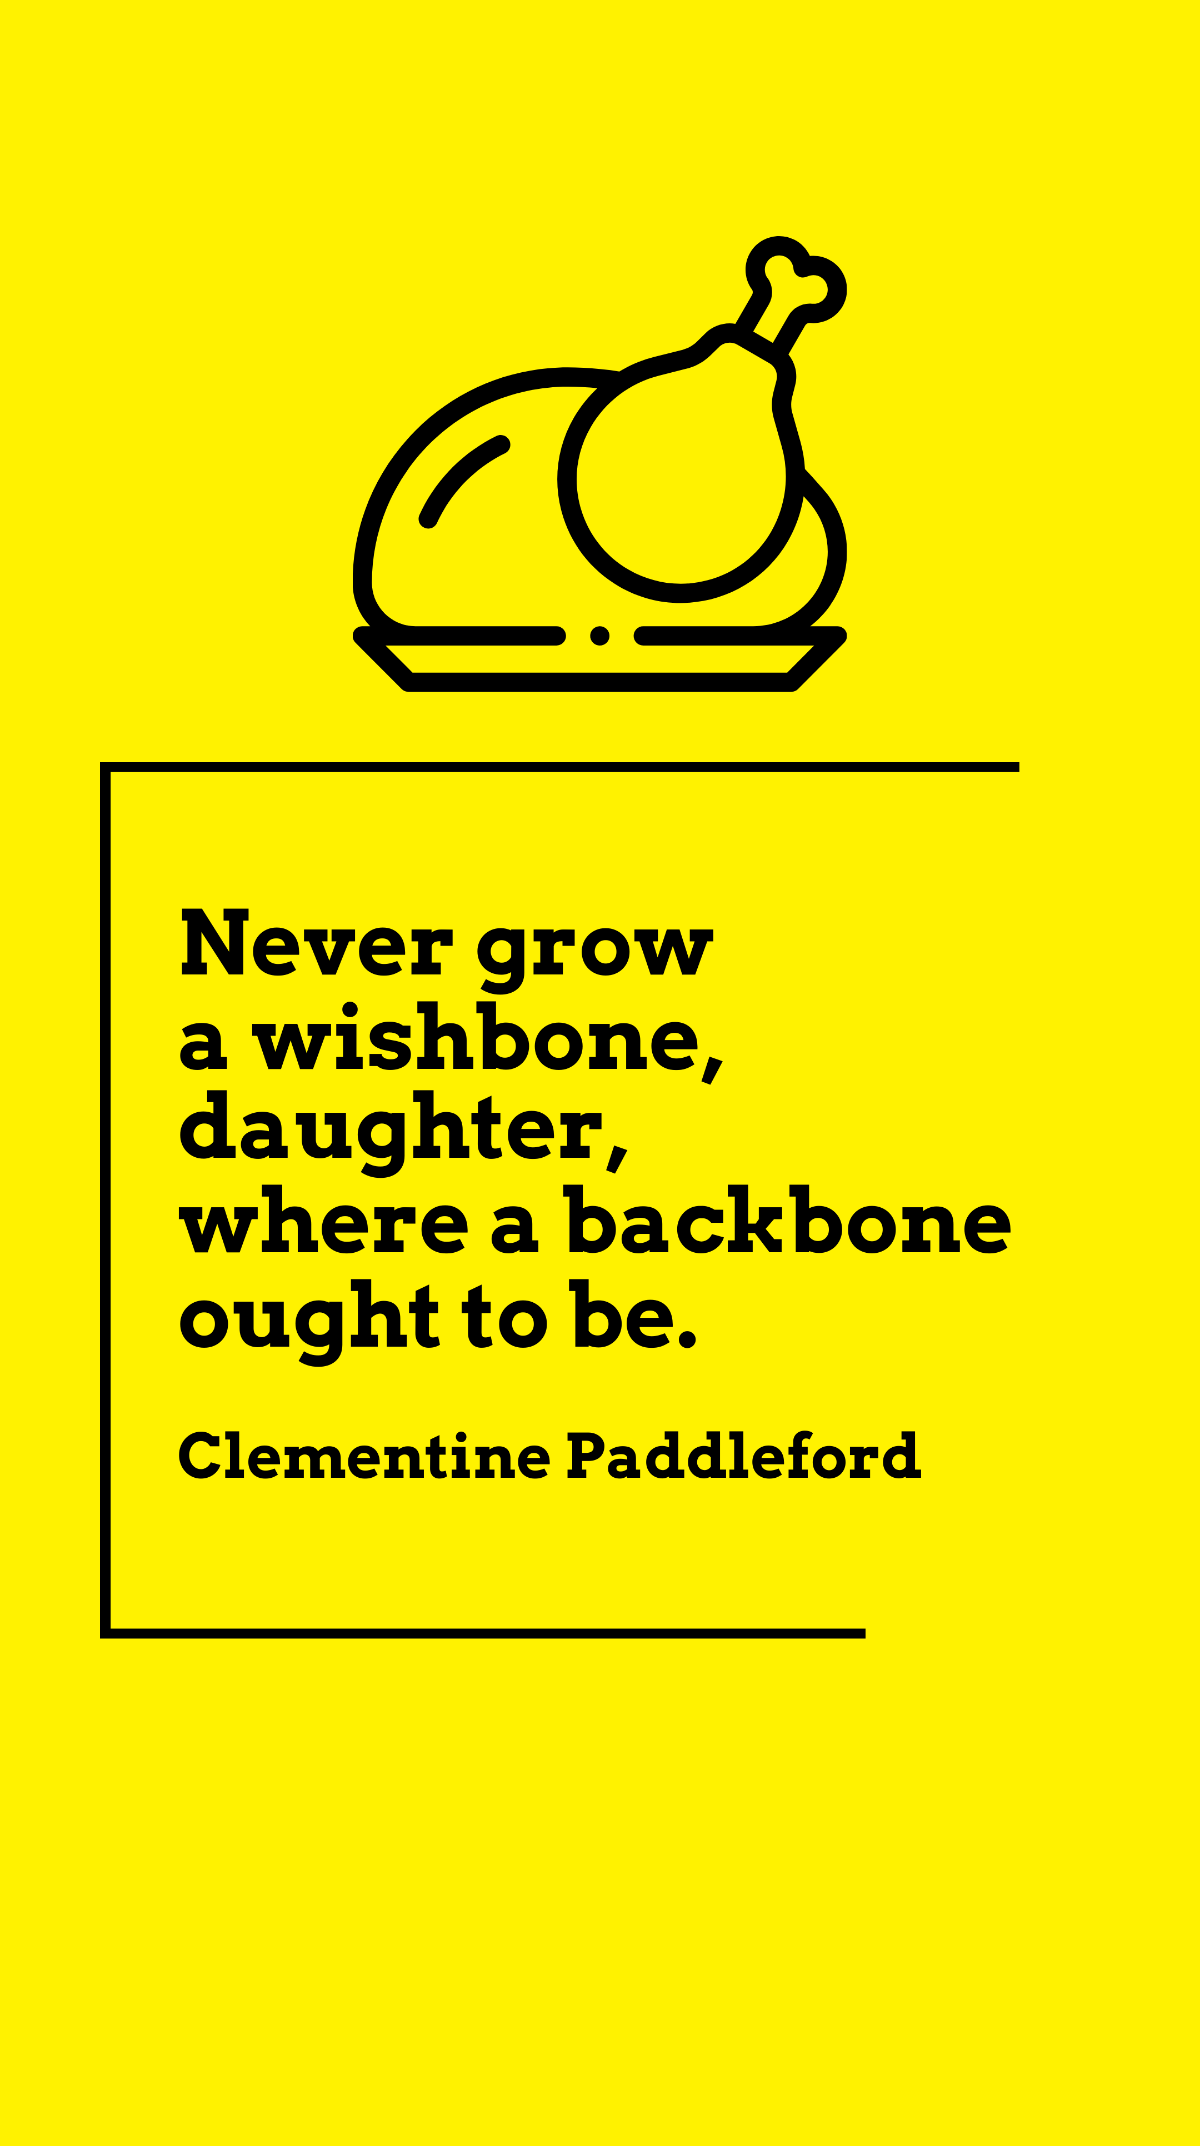 Clementine Paddleford - Never grow a wishbone, daughter, where a backbone ought to be.